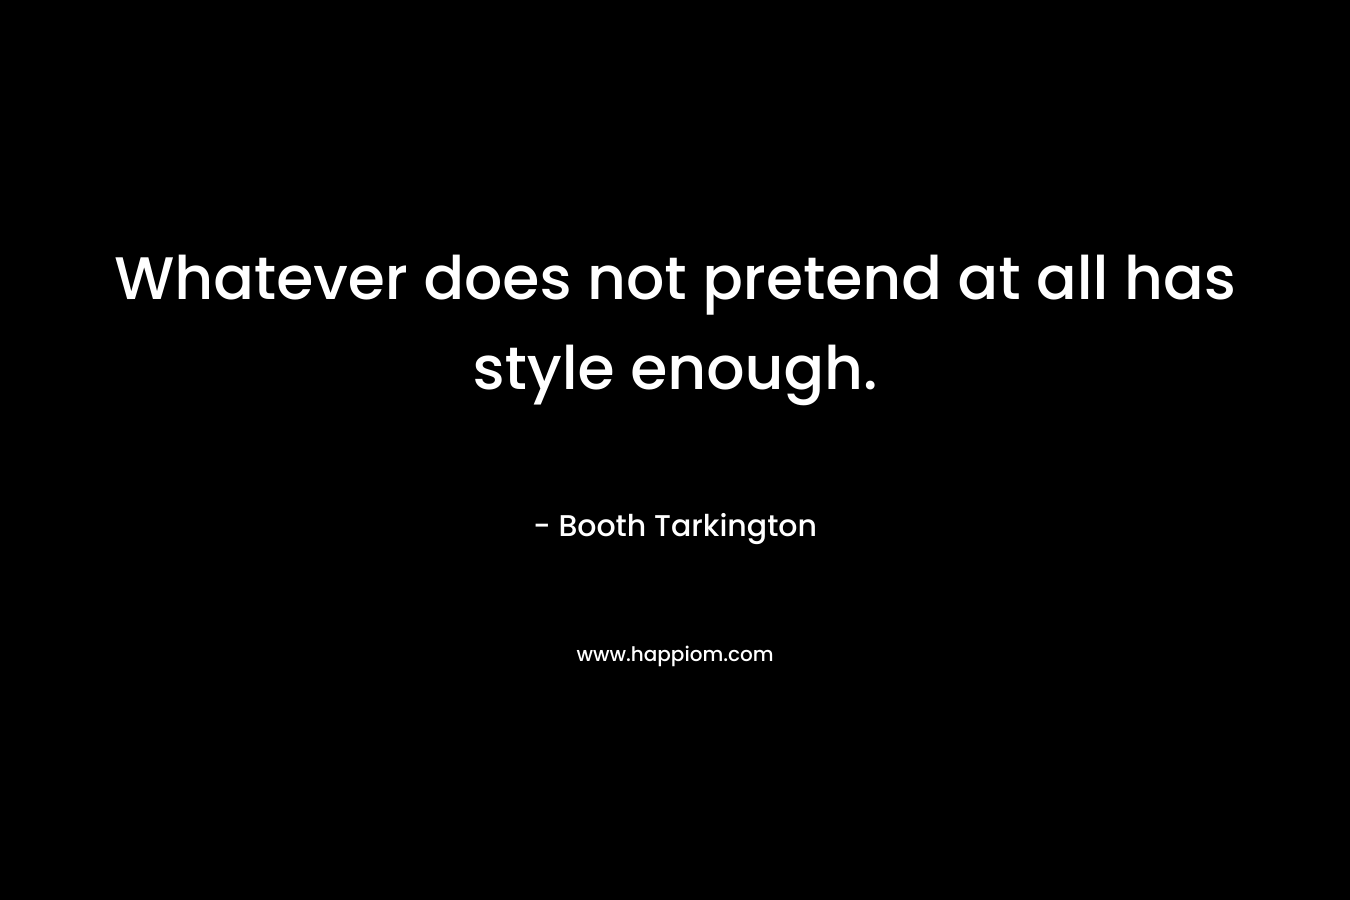 Whatever does not pretend at all has style enough. – Booth Tarkington